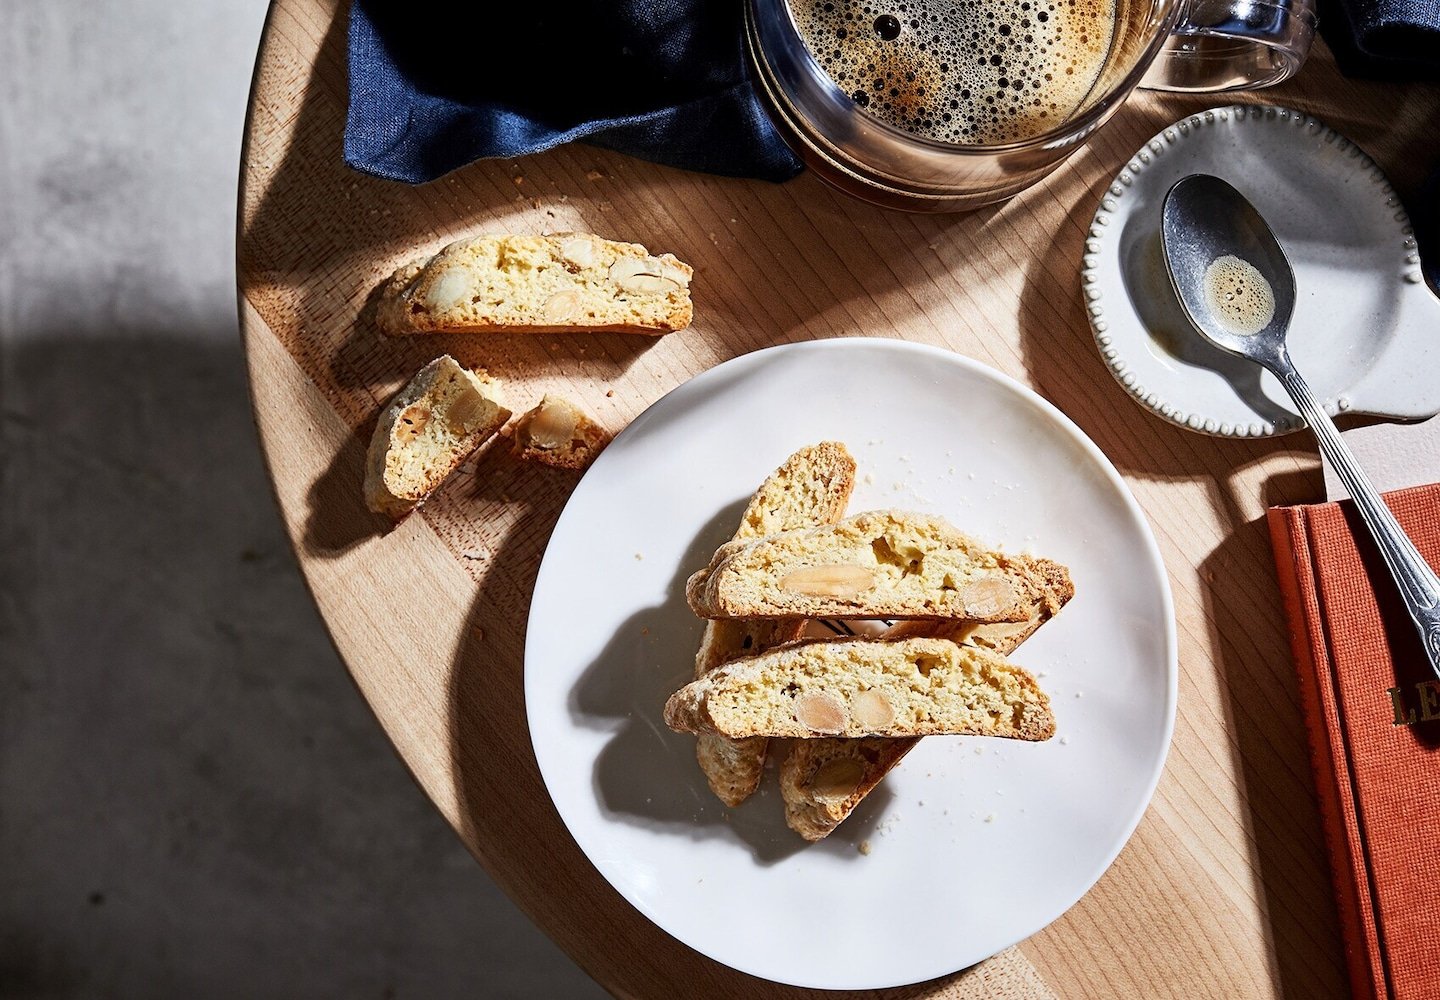 Your cup of coffee and these simple almond biscotti make a perfect match